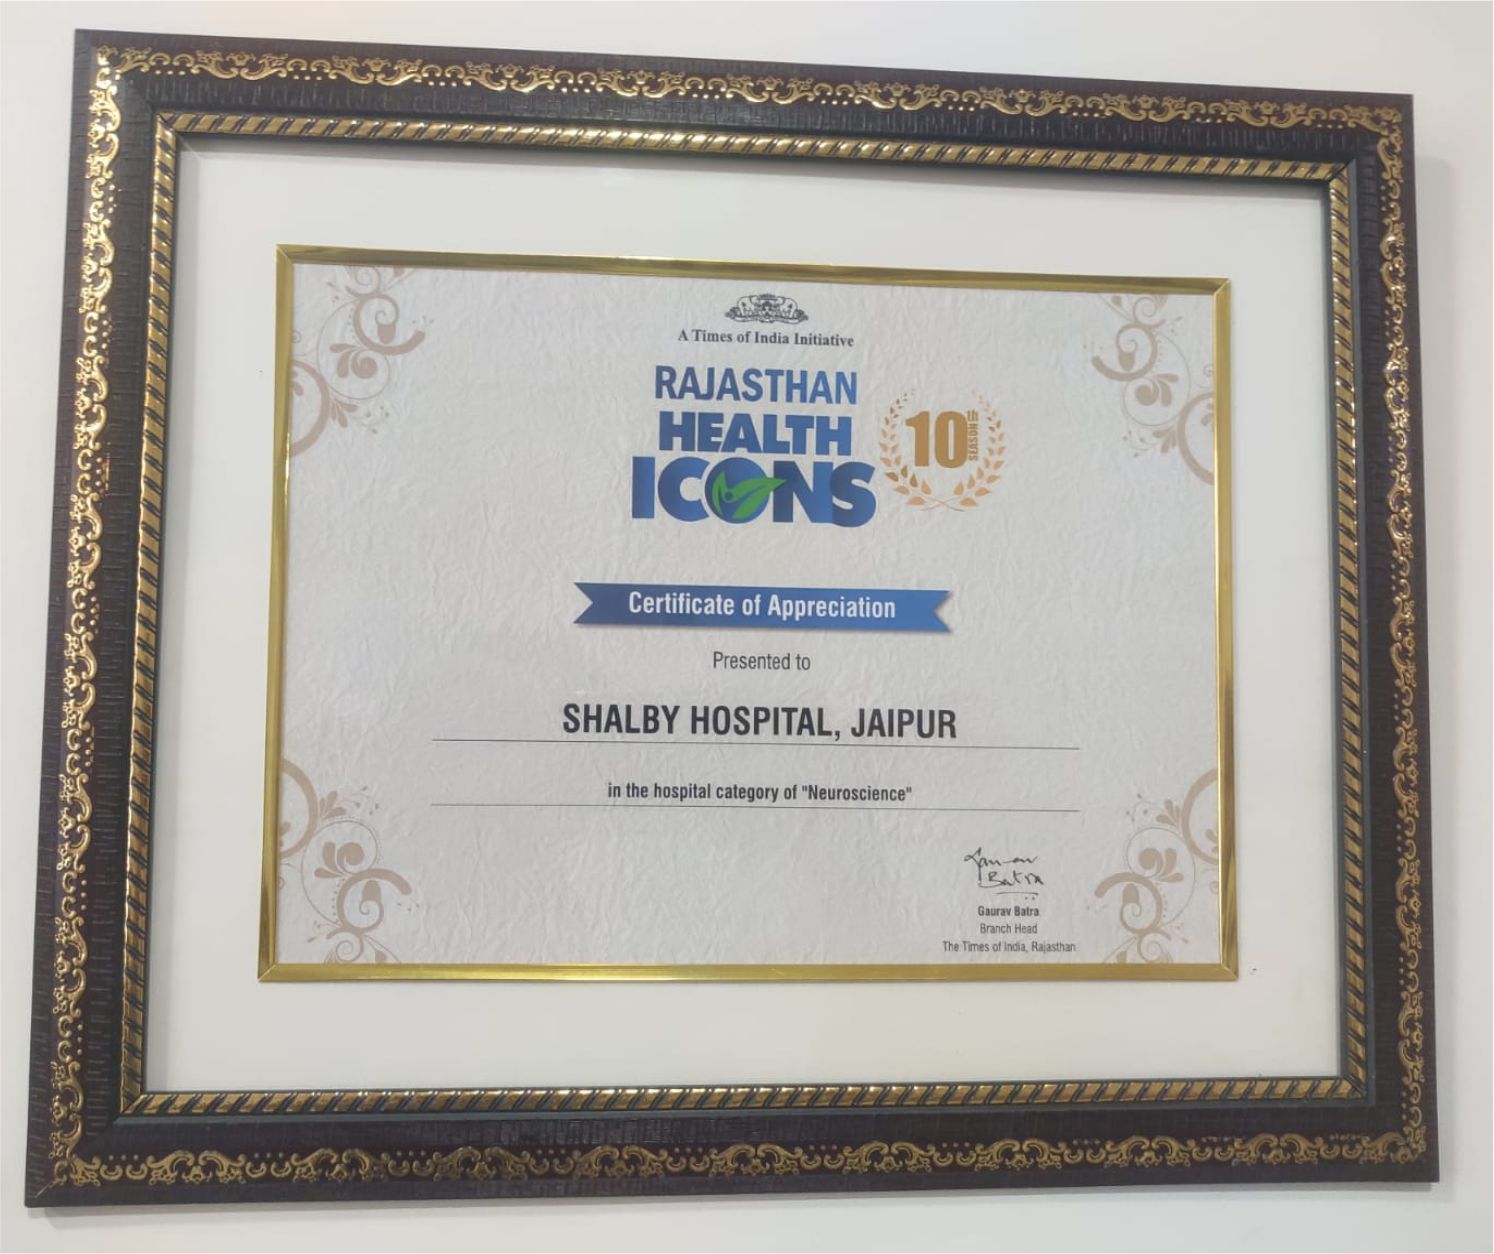 Rajasthan Health Icons award by The Times of India - shalby hospital jaipur